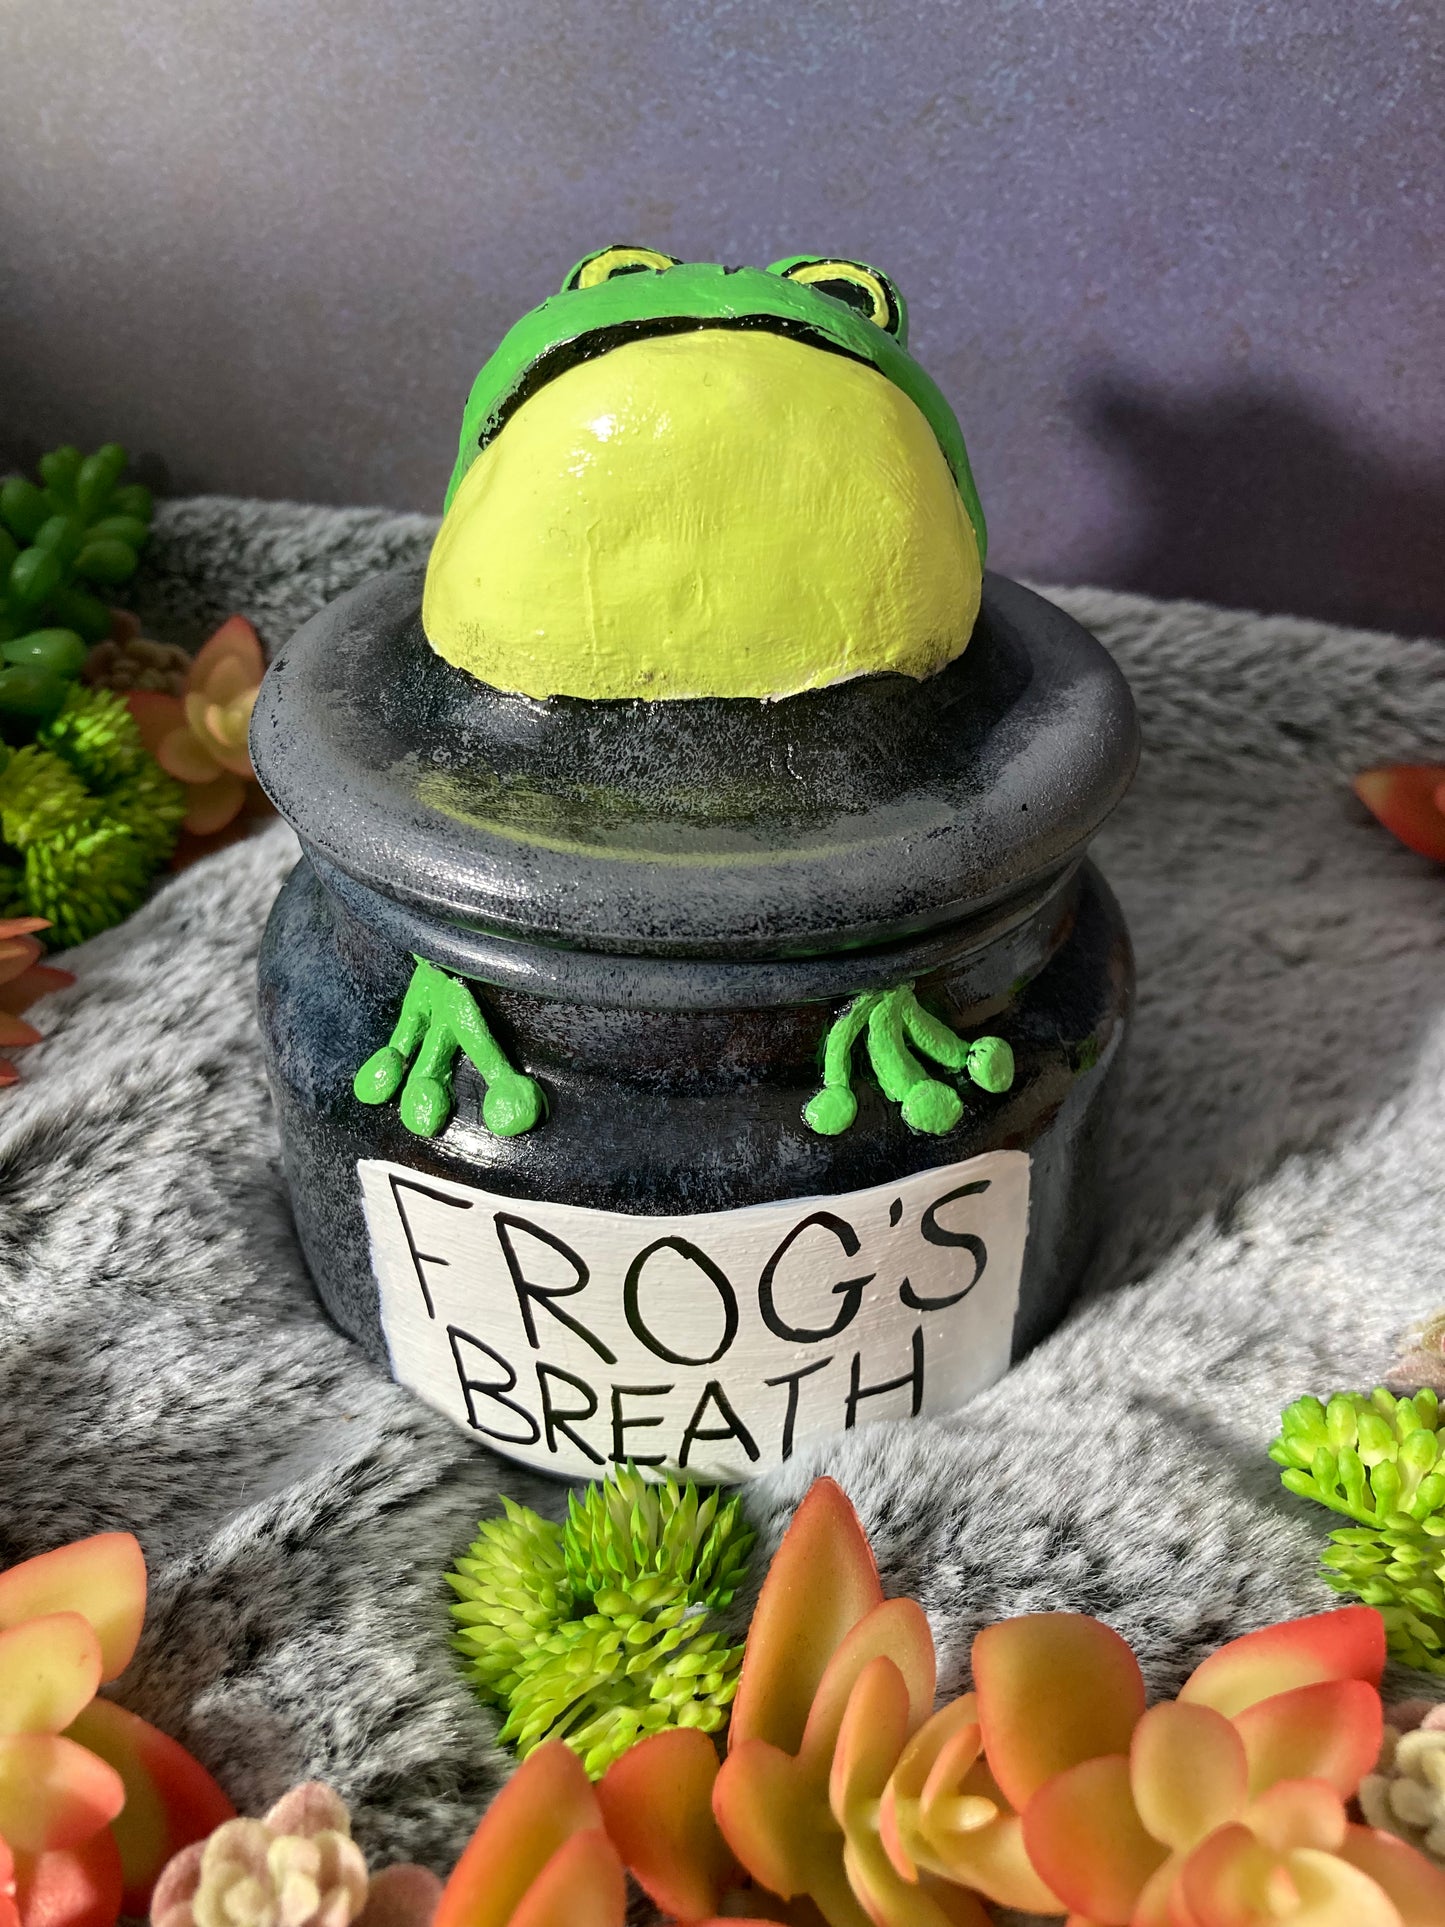 Frogs Breath candle